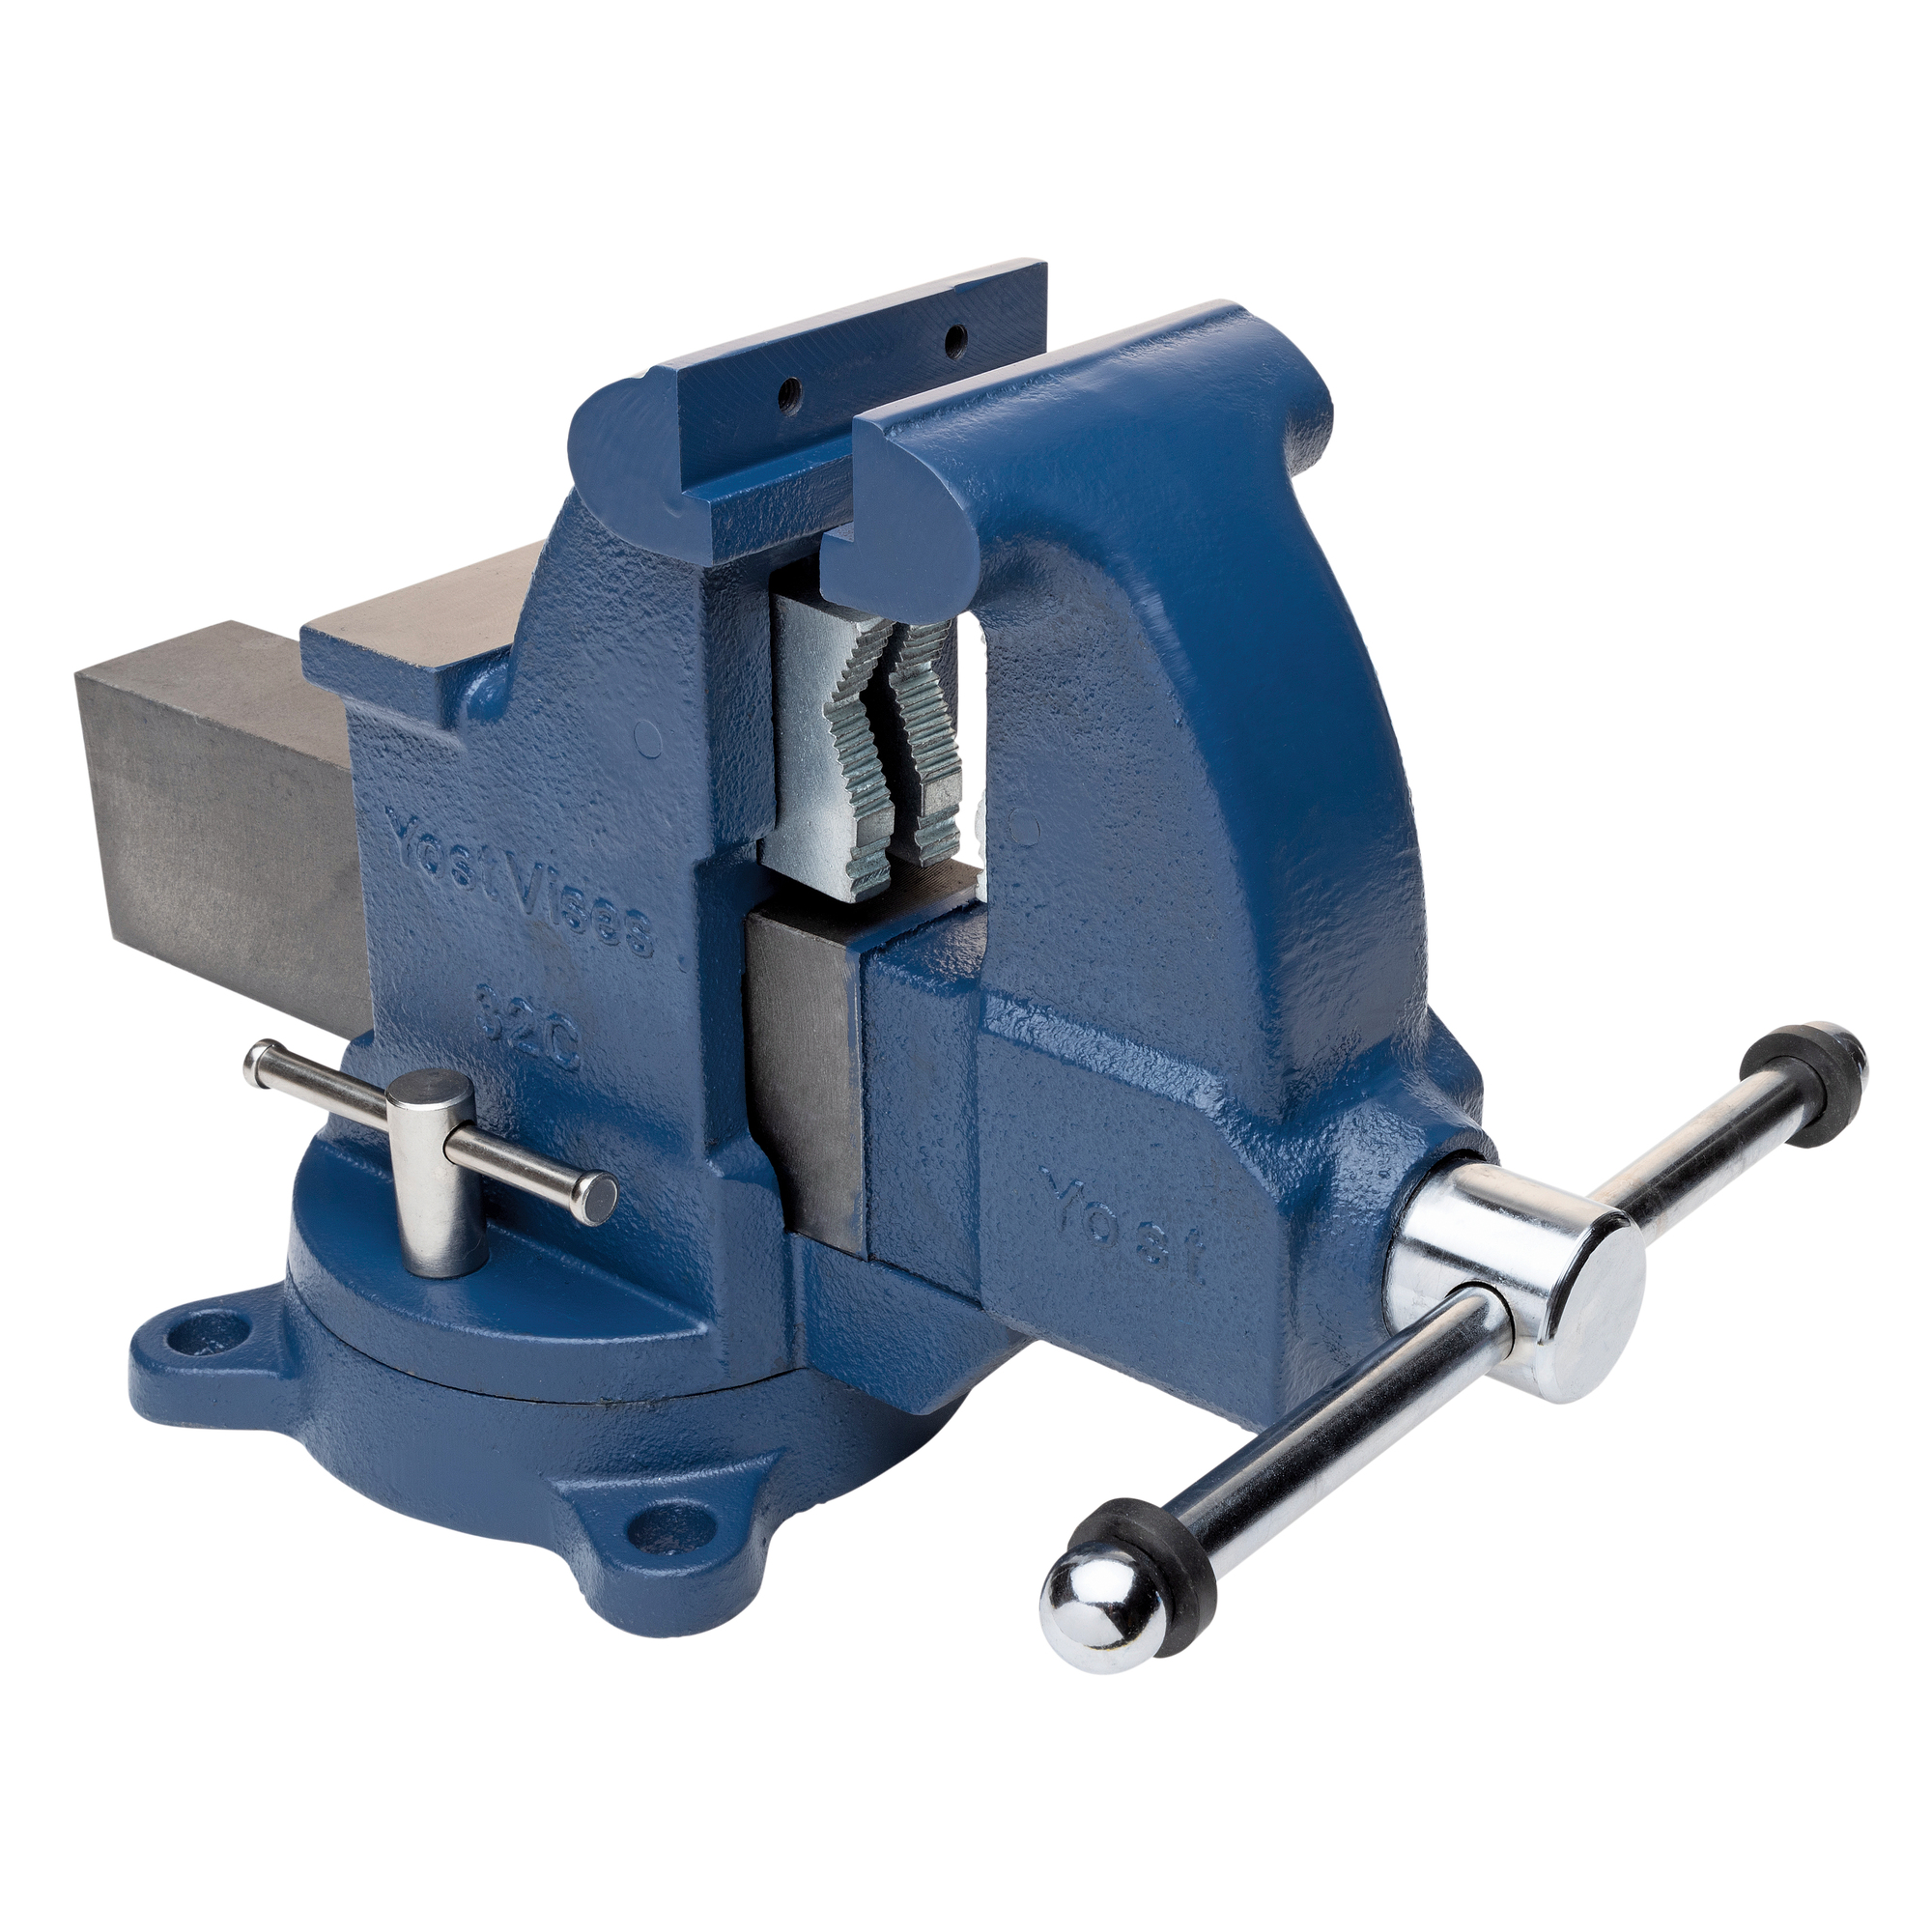 Yost Vises, 4.5Inch HD Combo Vise, Jaw Width 4.5 in, Jaw Capacity 6 in, Material Ductile Iron, Model 32C